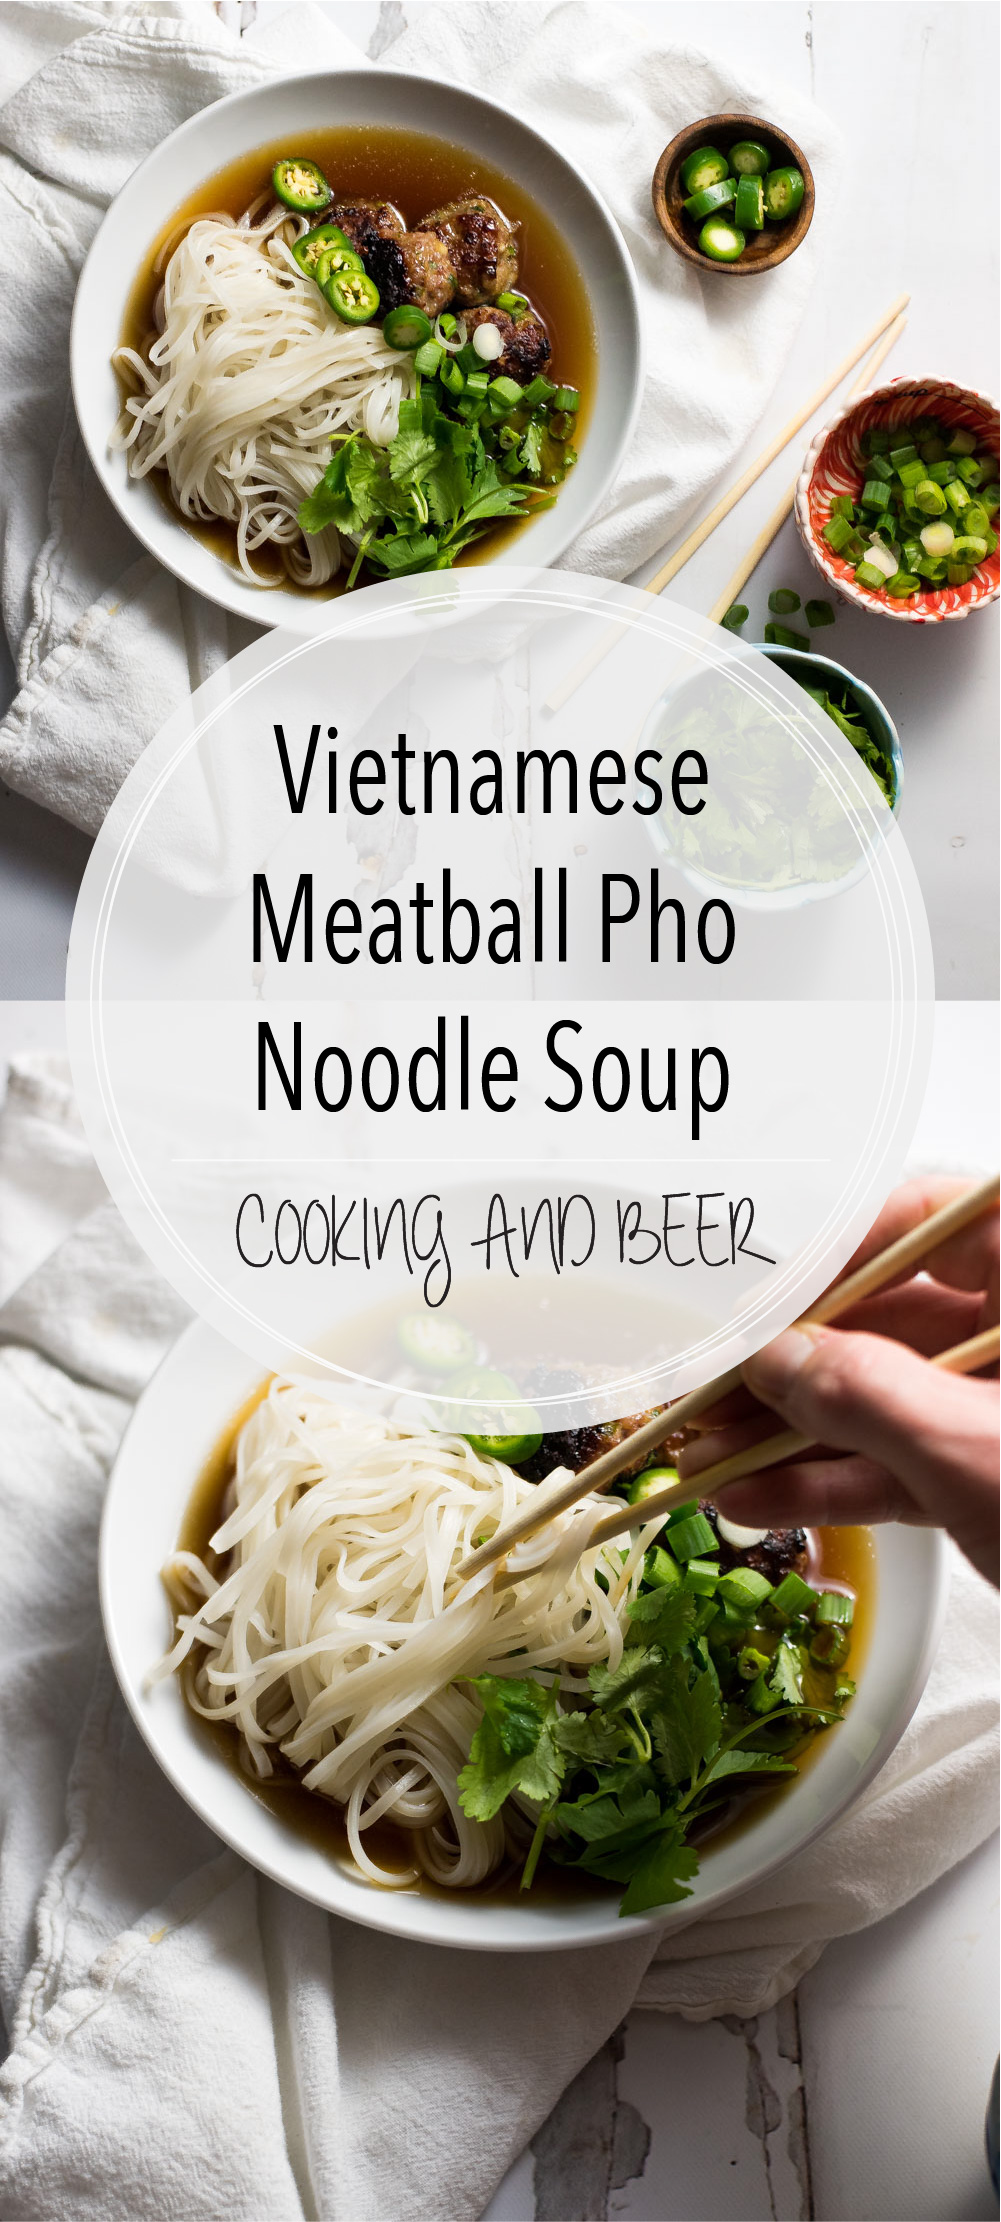 Vietnamese meatball pho noodle soup (pho bo) is a comforting way to warm you up this winter. The meatballs set this pho apart and are super flavorful!